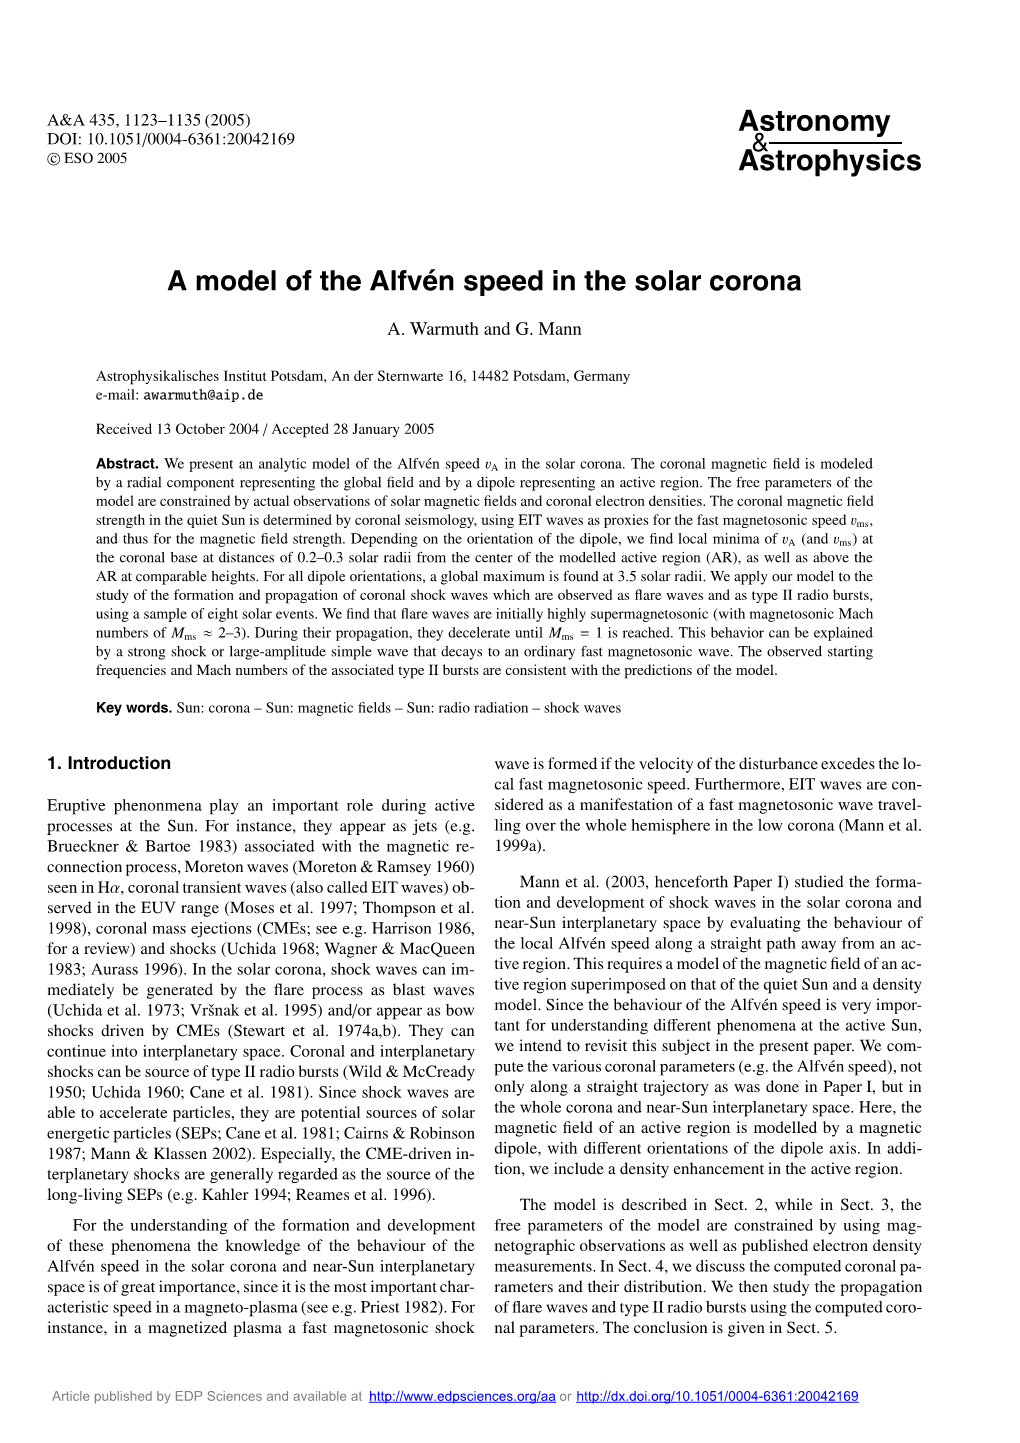 A Model of the Alfvén Speed in the Solar Corona